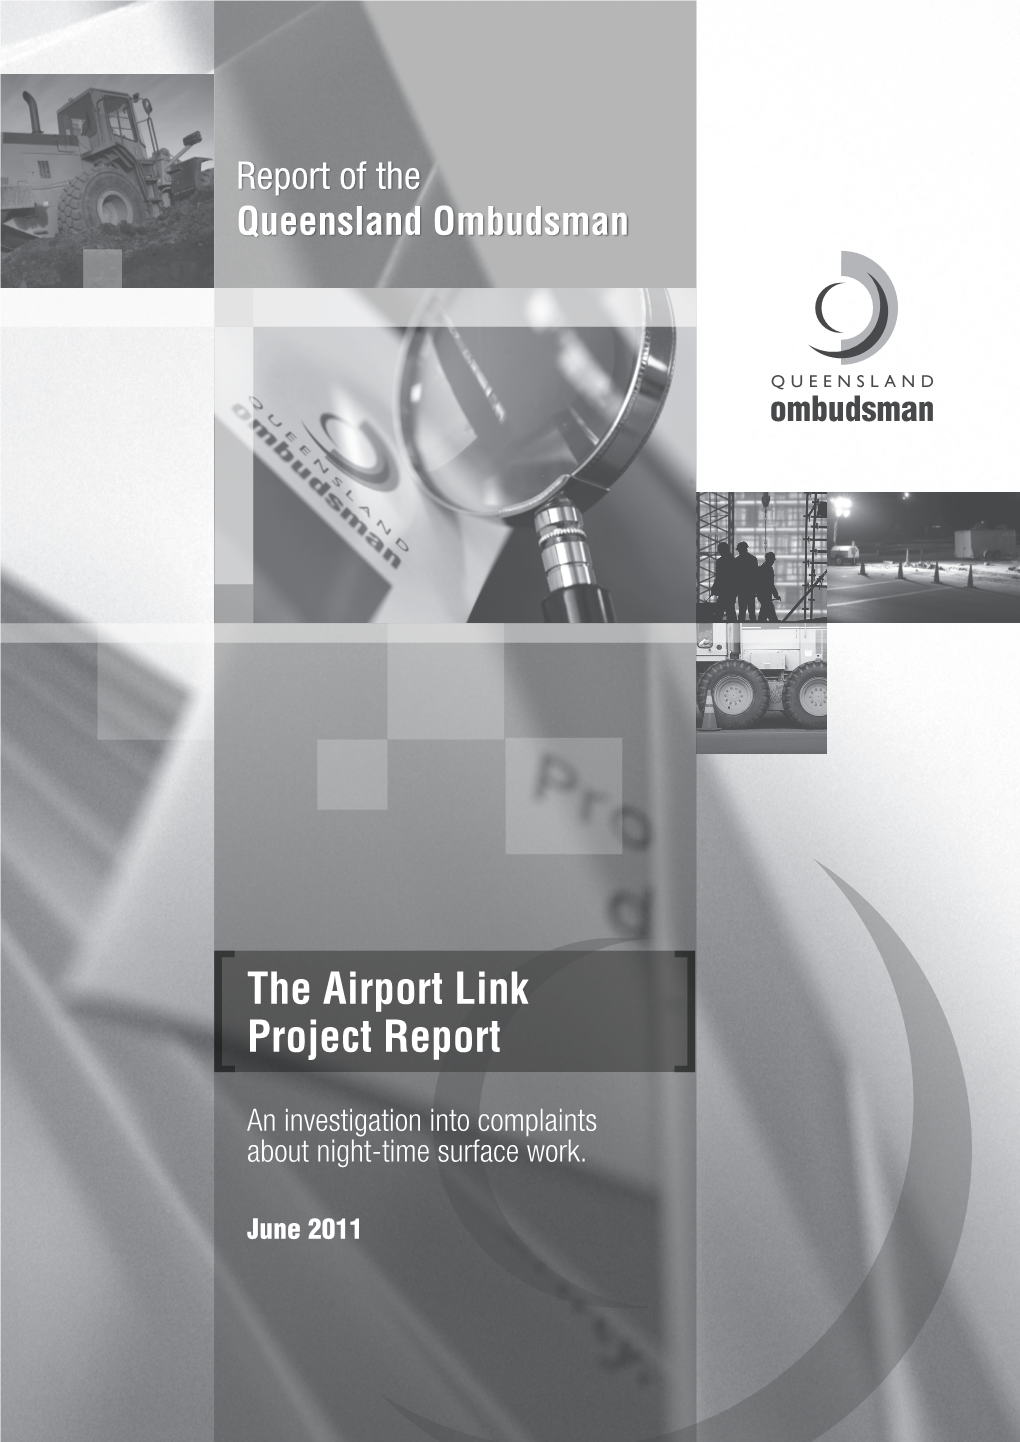 The Airport Link Project Report